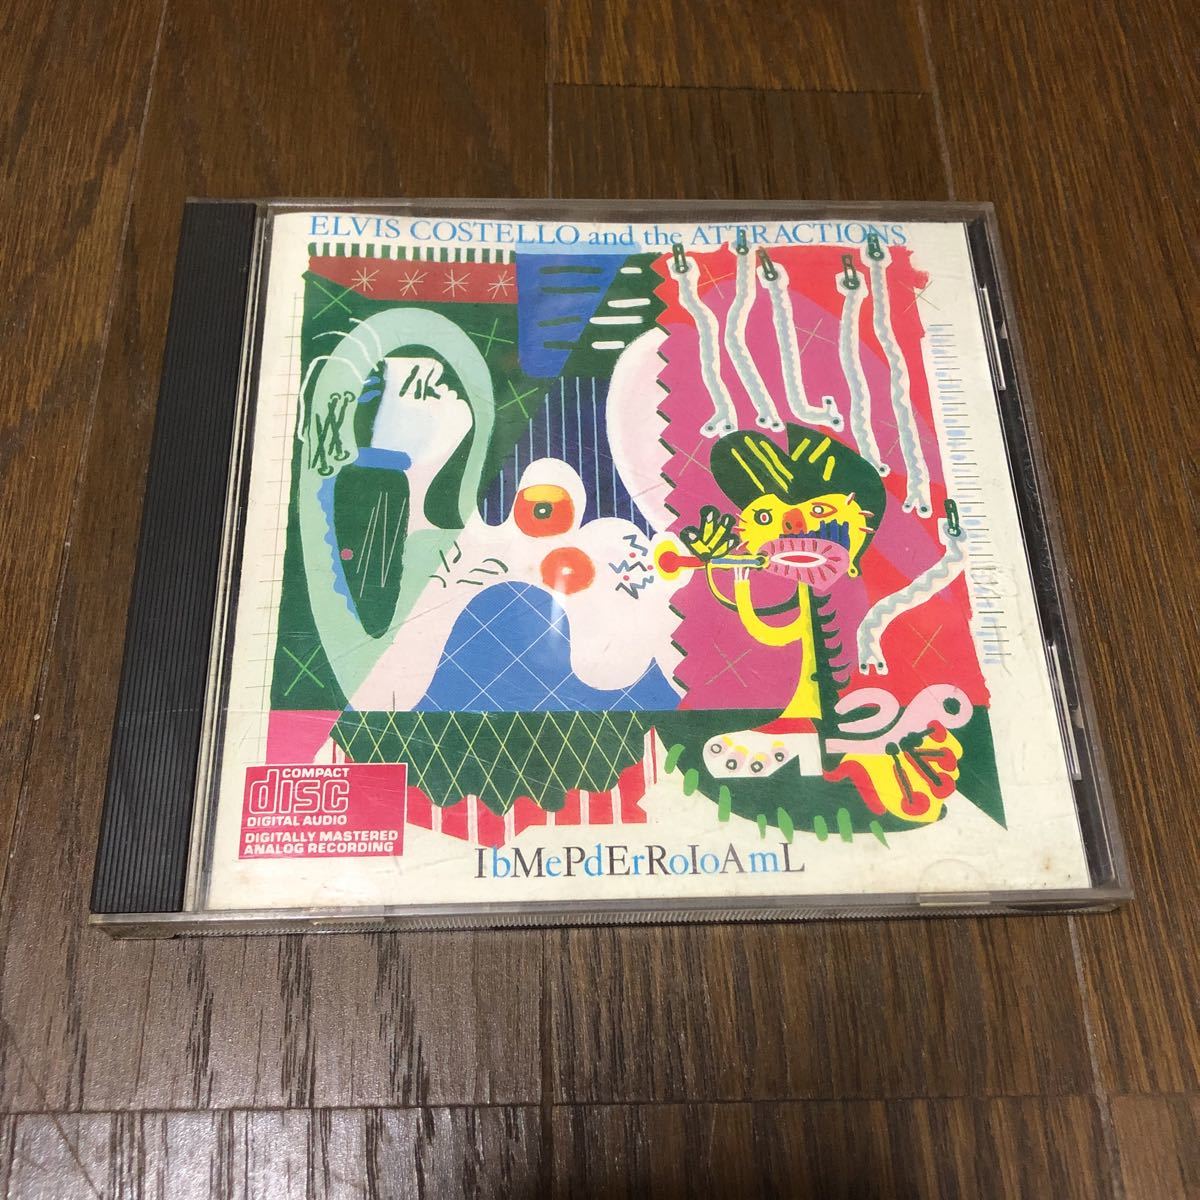 Elvis Costello And The Attractions* Imperial Bedroom USA盤CD